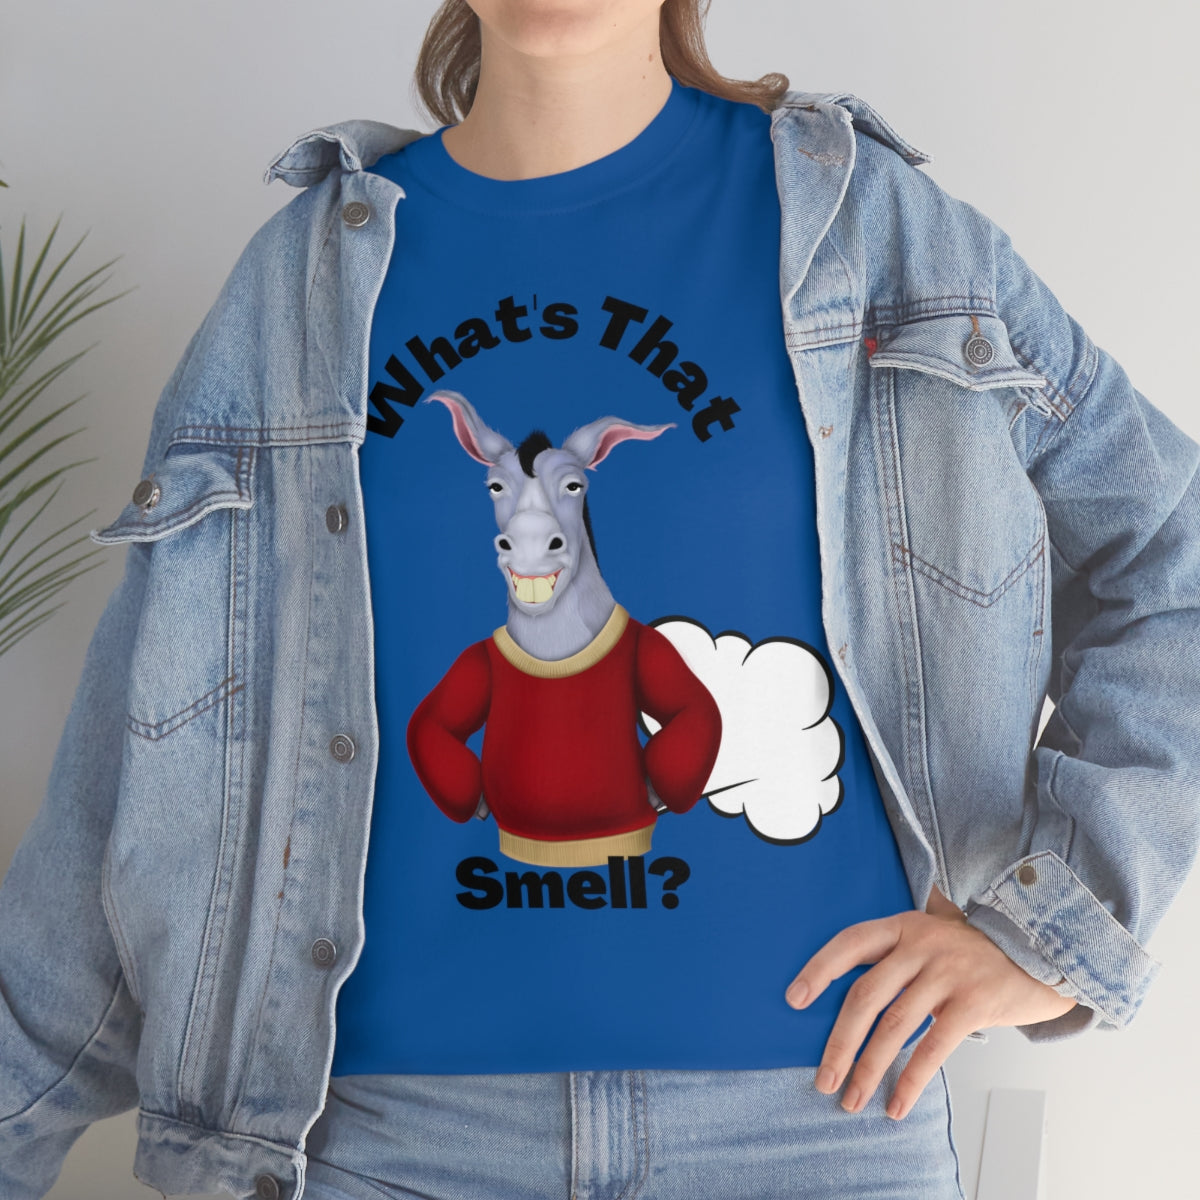 What's that smell? Unisex Heavy Cotton Tee